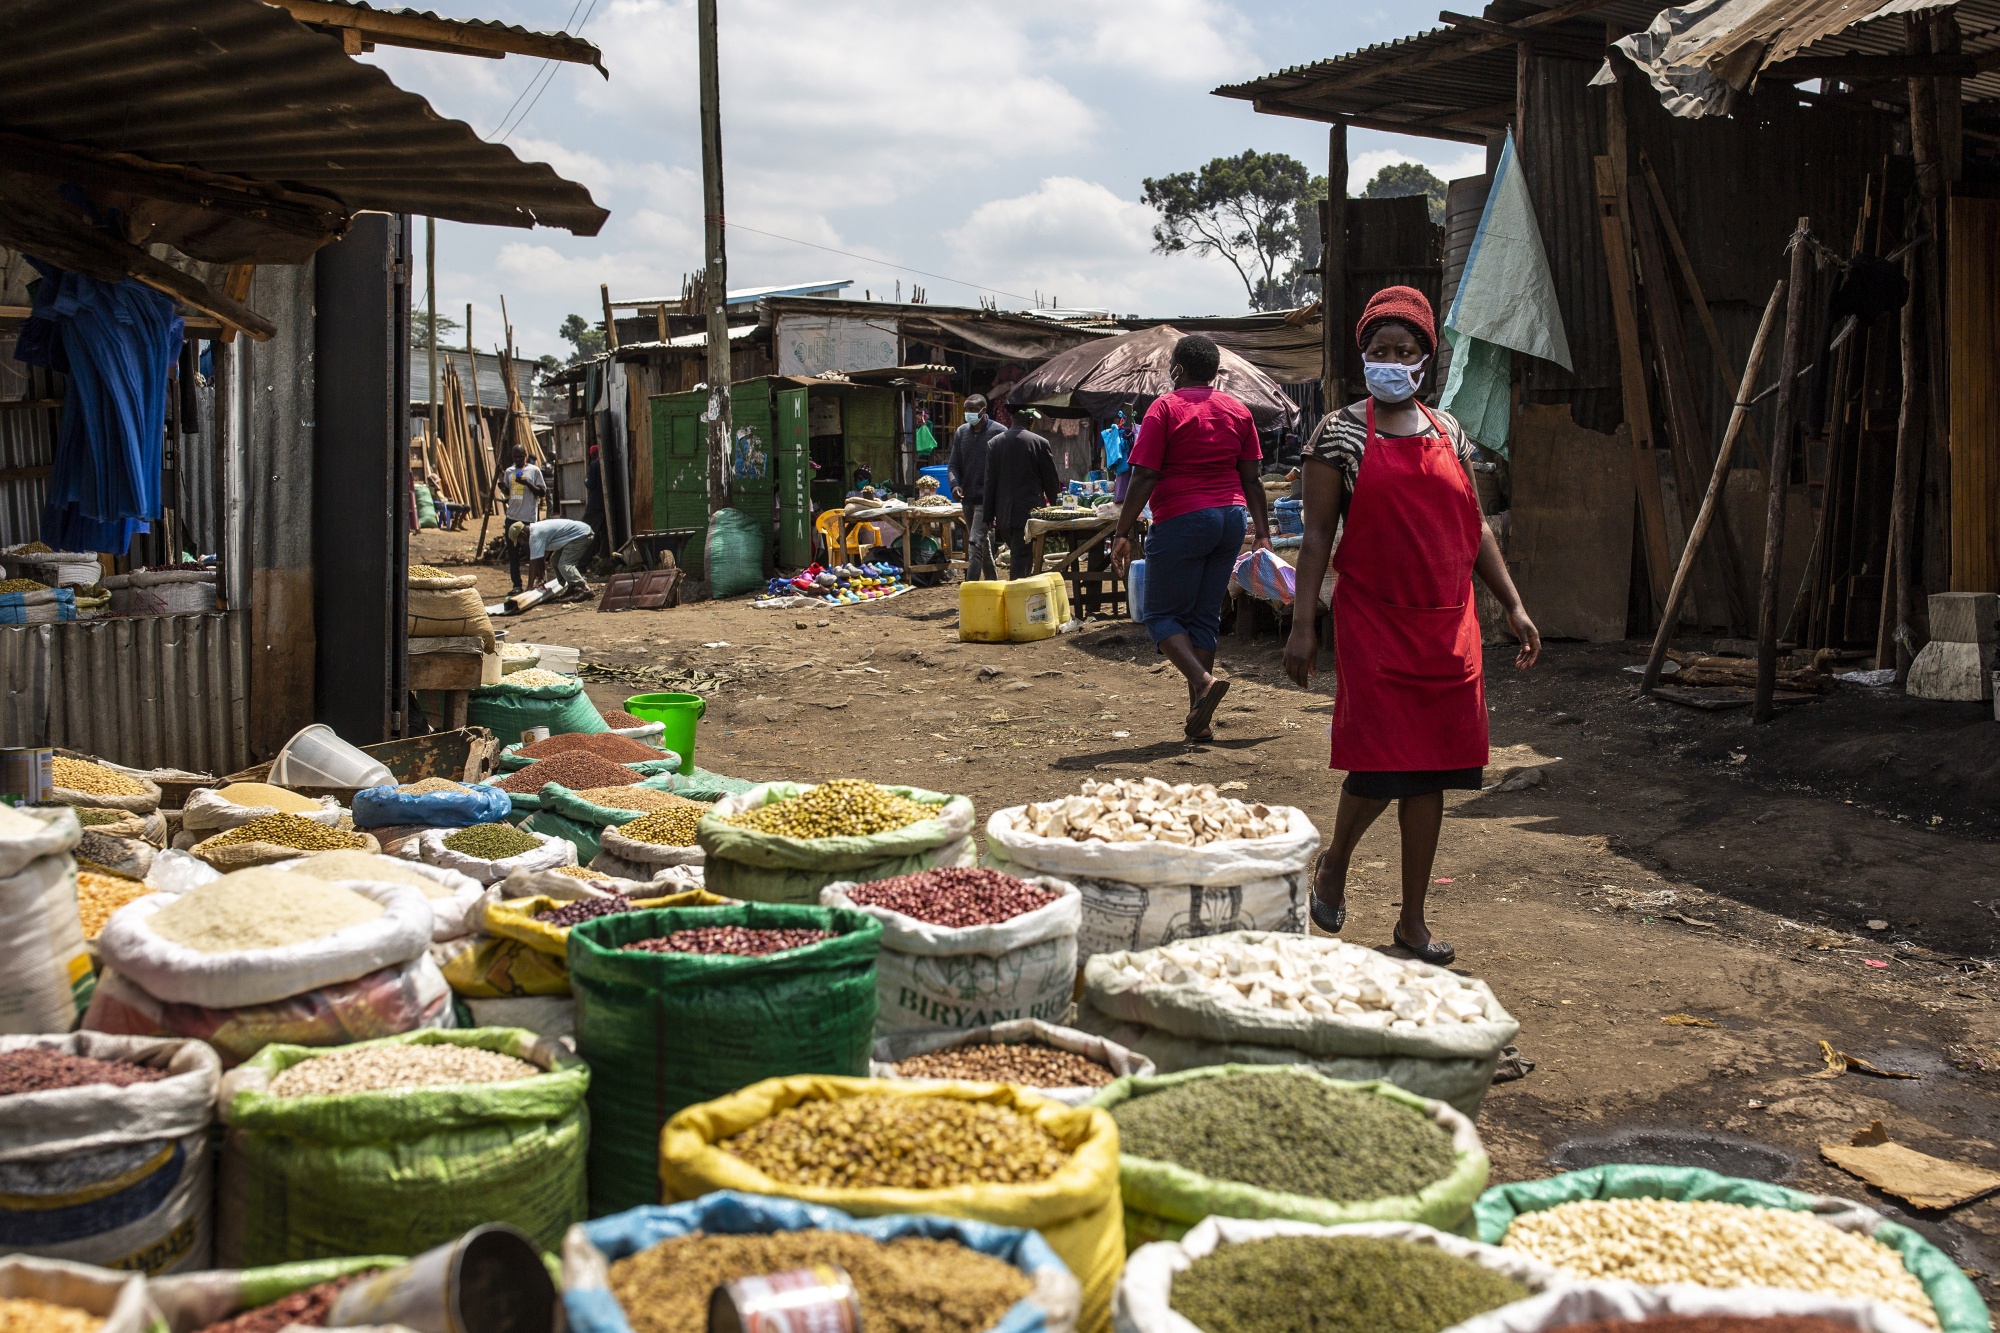 A vendor&nbsp;walks by bags of beans and pulses for sale at Toi market in Nairobi, Kenya.